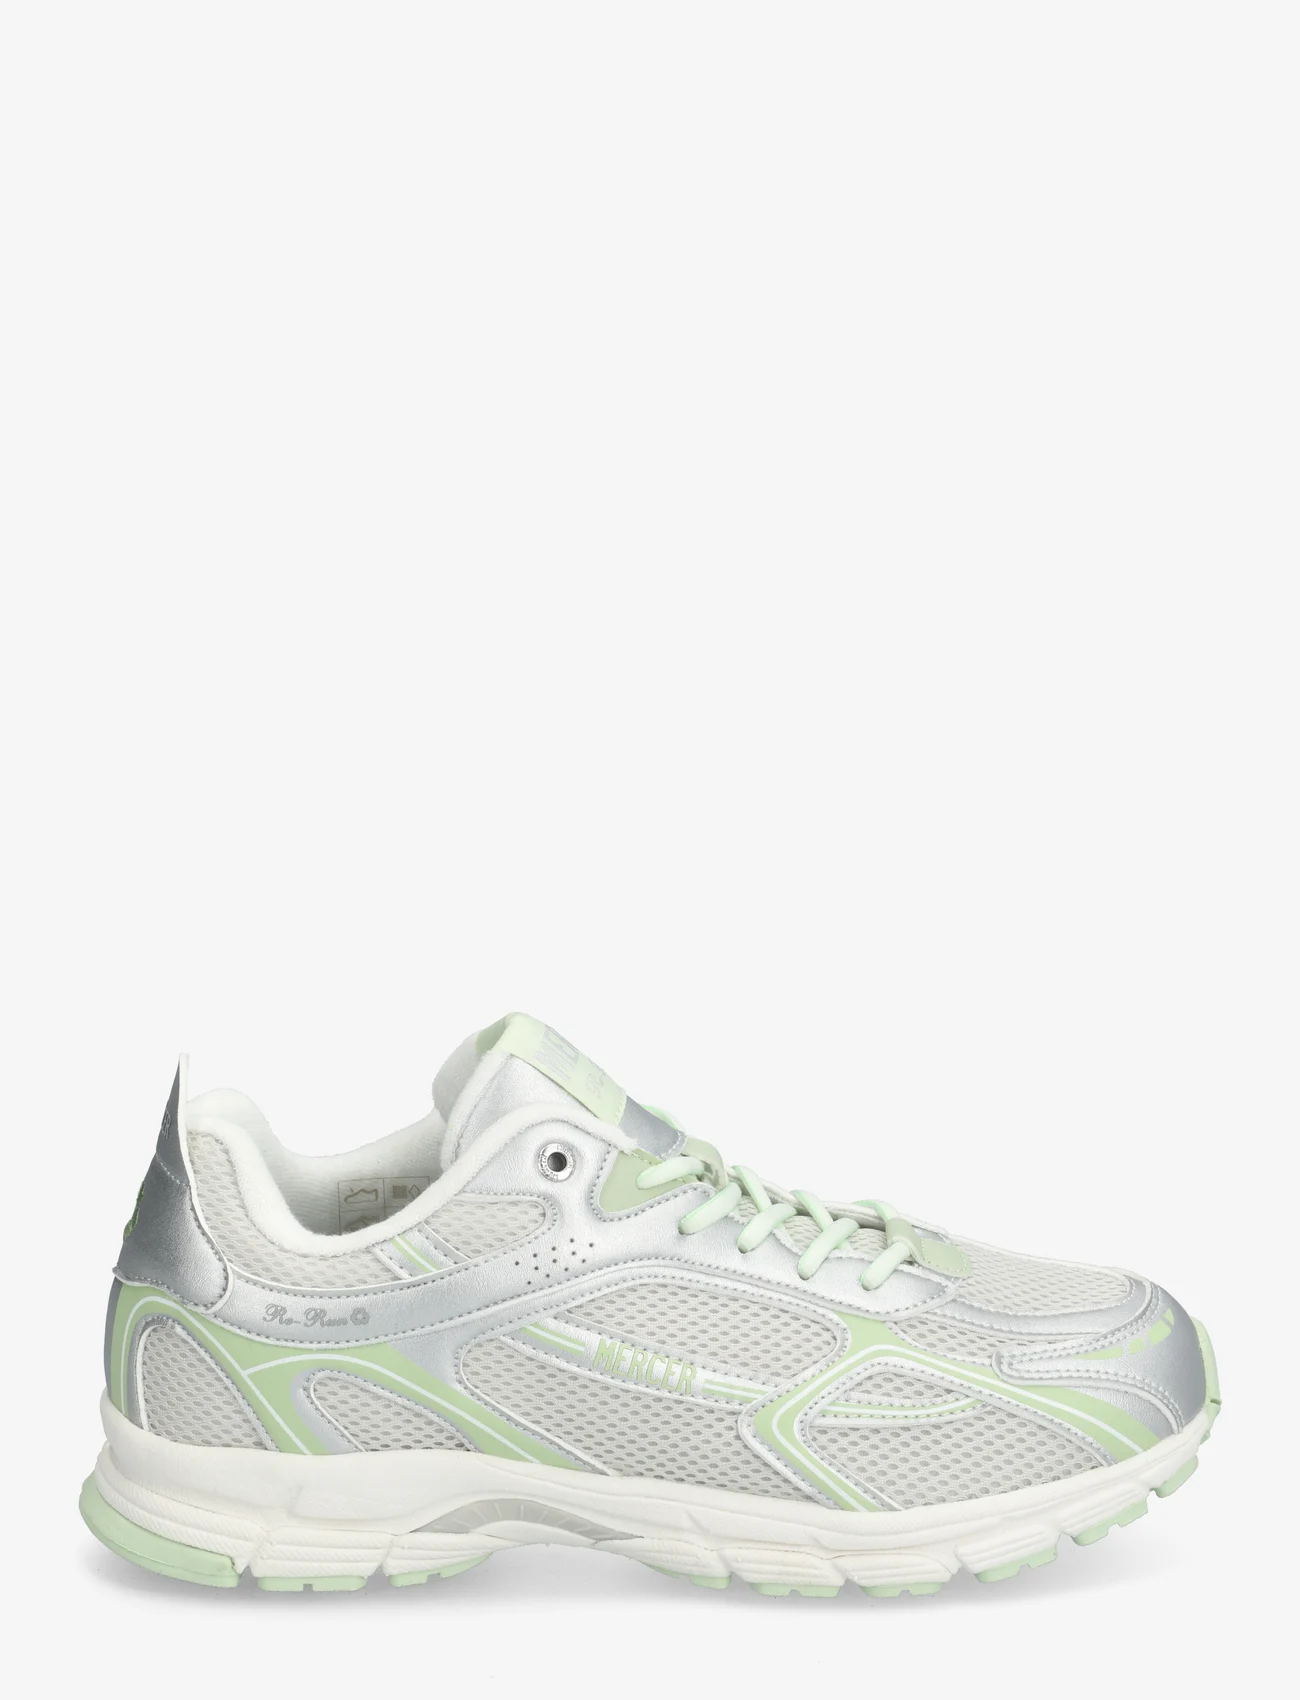 Mercer Amsterdam - The Re-Run Speed - low tops - green/silver - 1